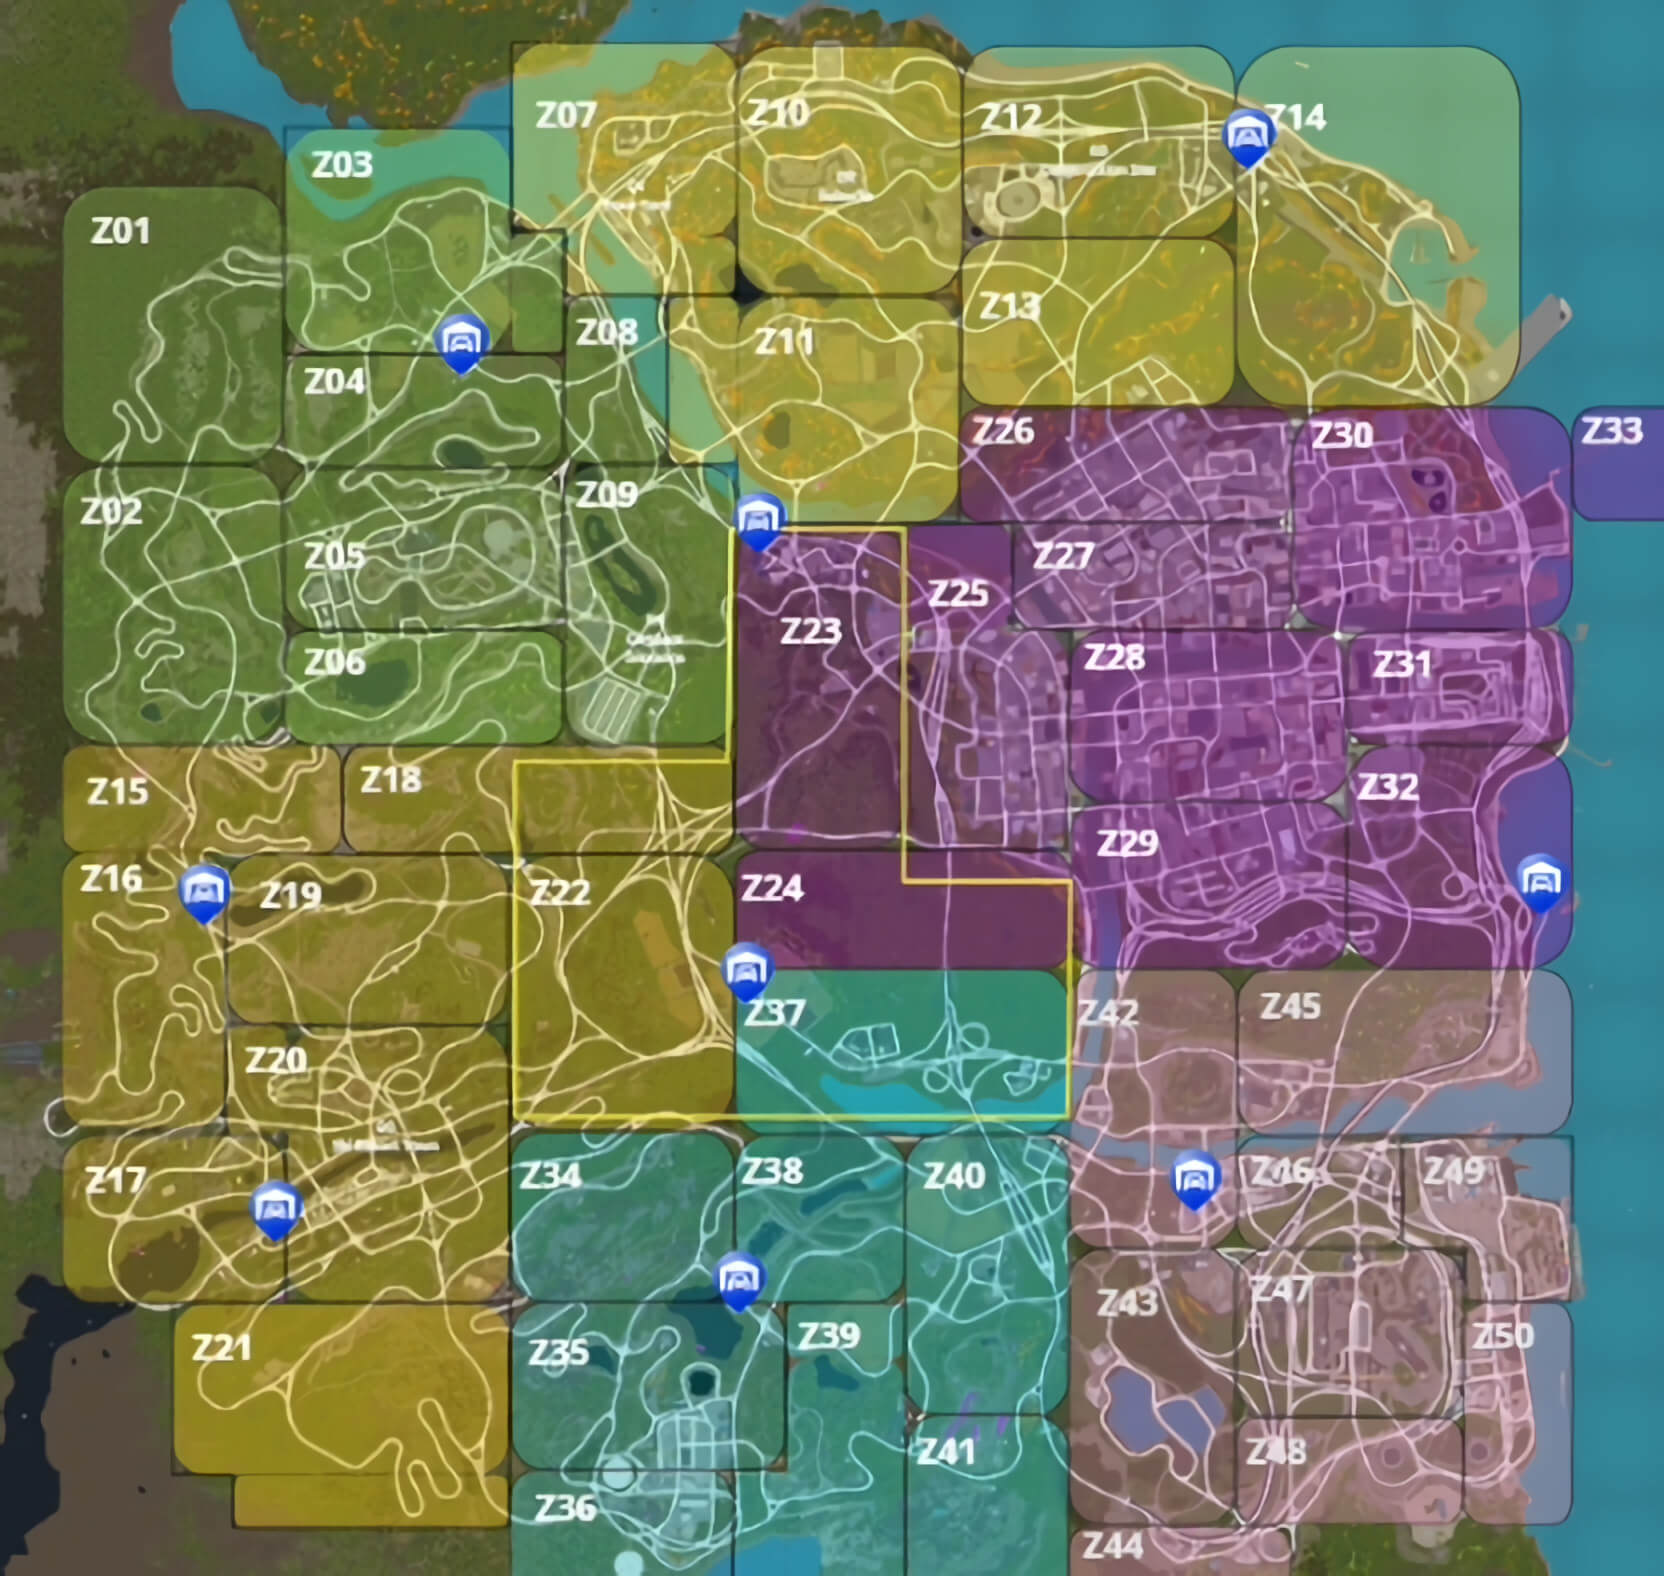 Nfs 2022 Leaked Map